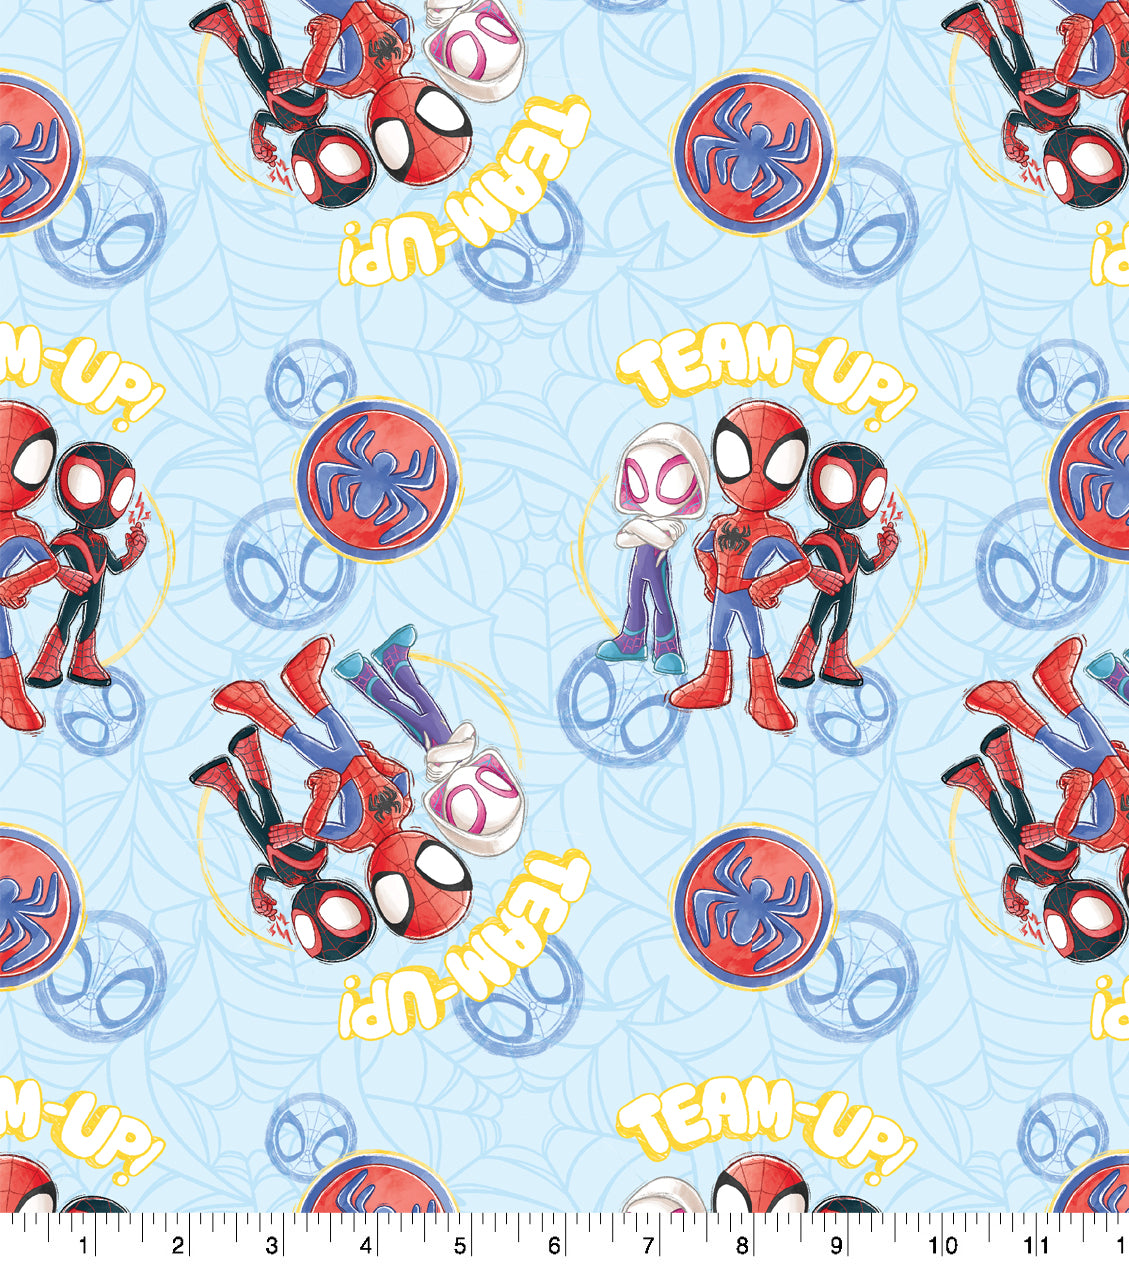 Spidey and Friends Cotton Fabric Stickers